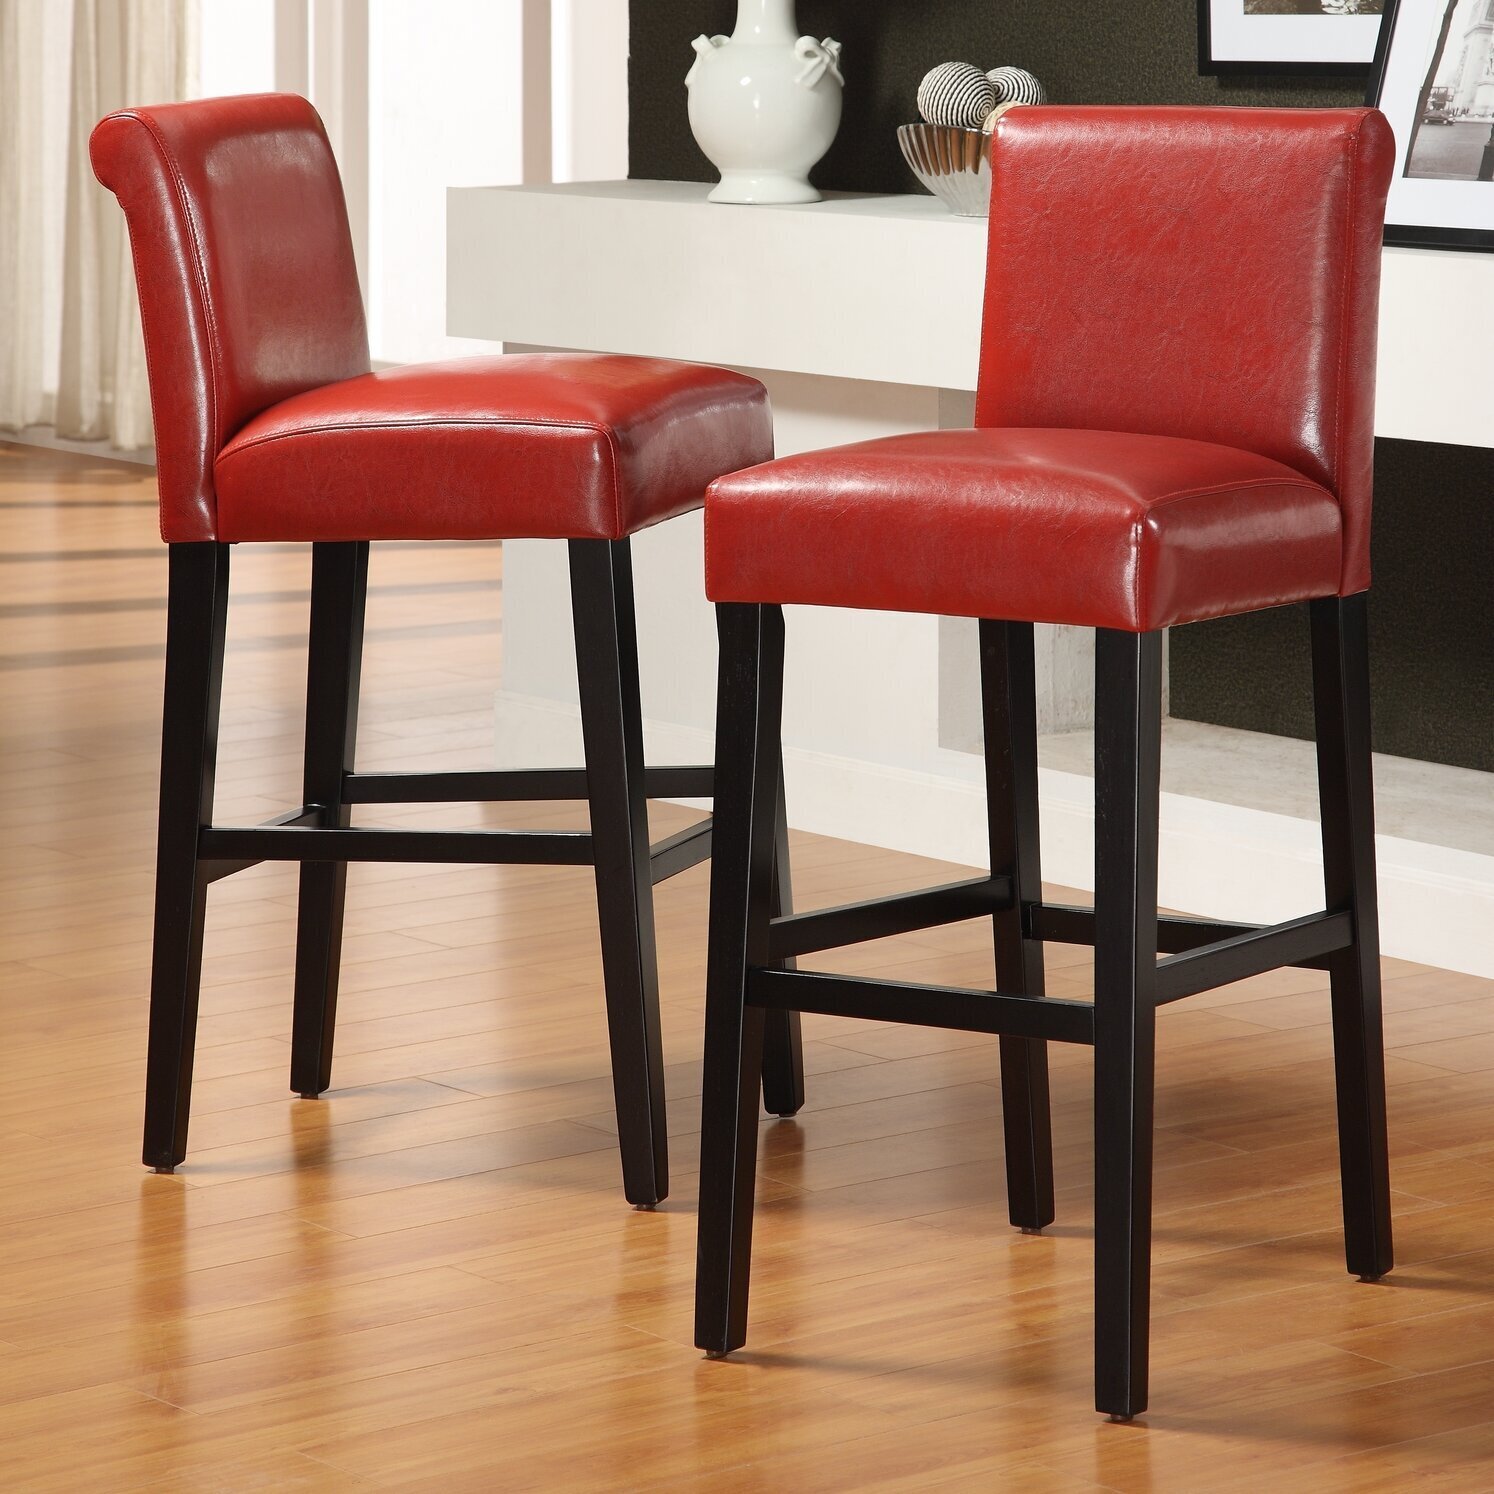 Classic Style Red Leather Bar Stools